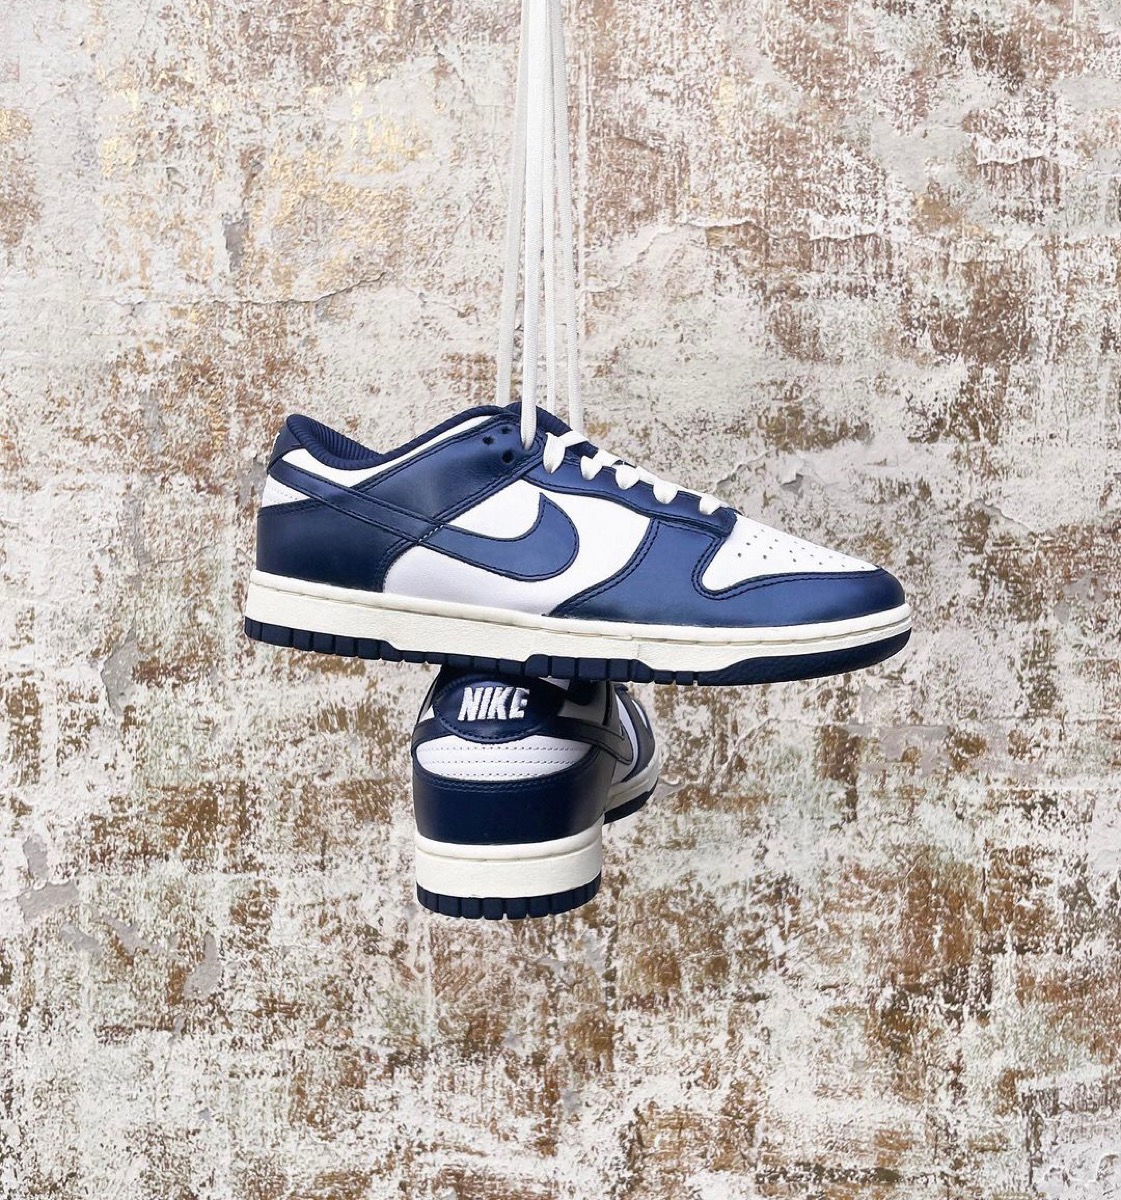 Nike Wmns Dunk Low PRM “Vintage Navy”が国内9月9日より発売［FN7197 